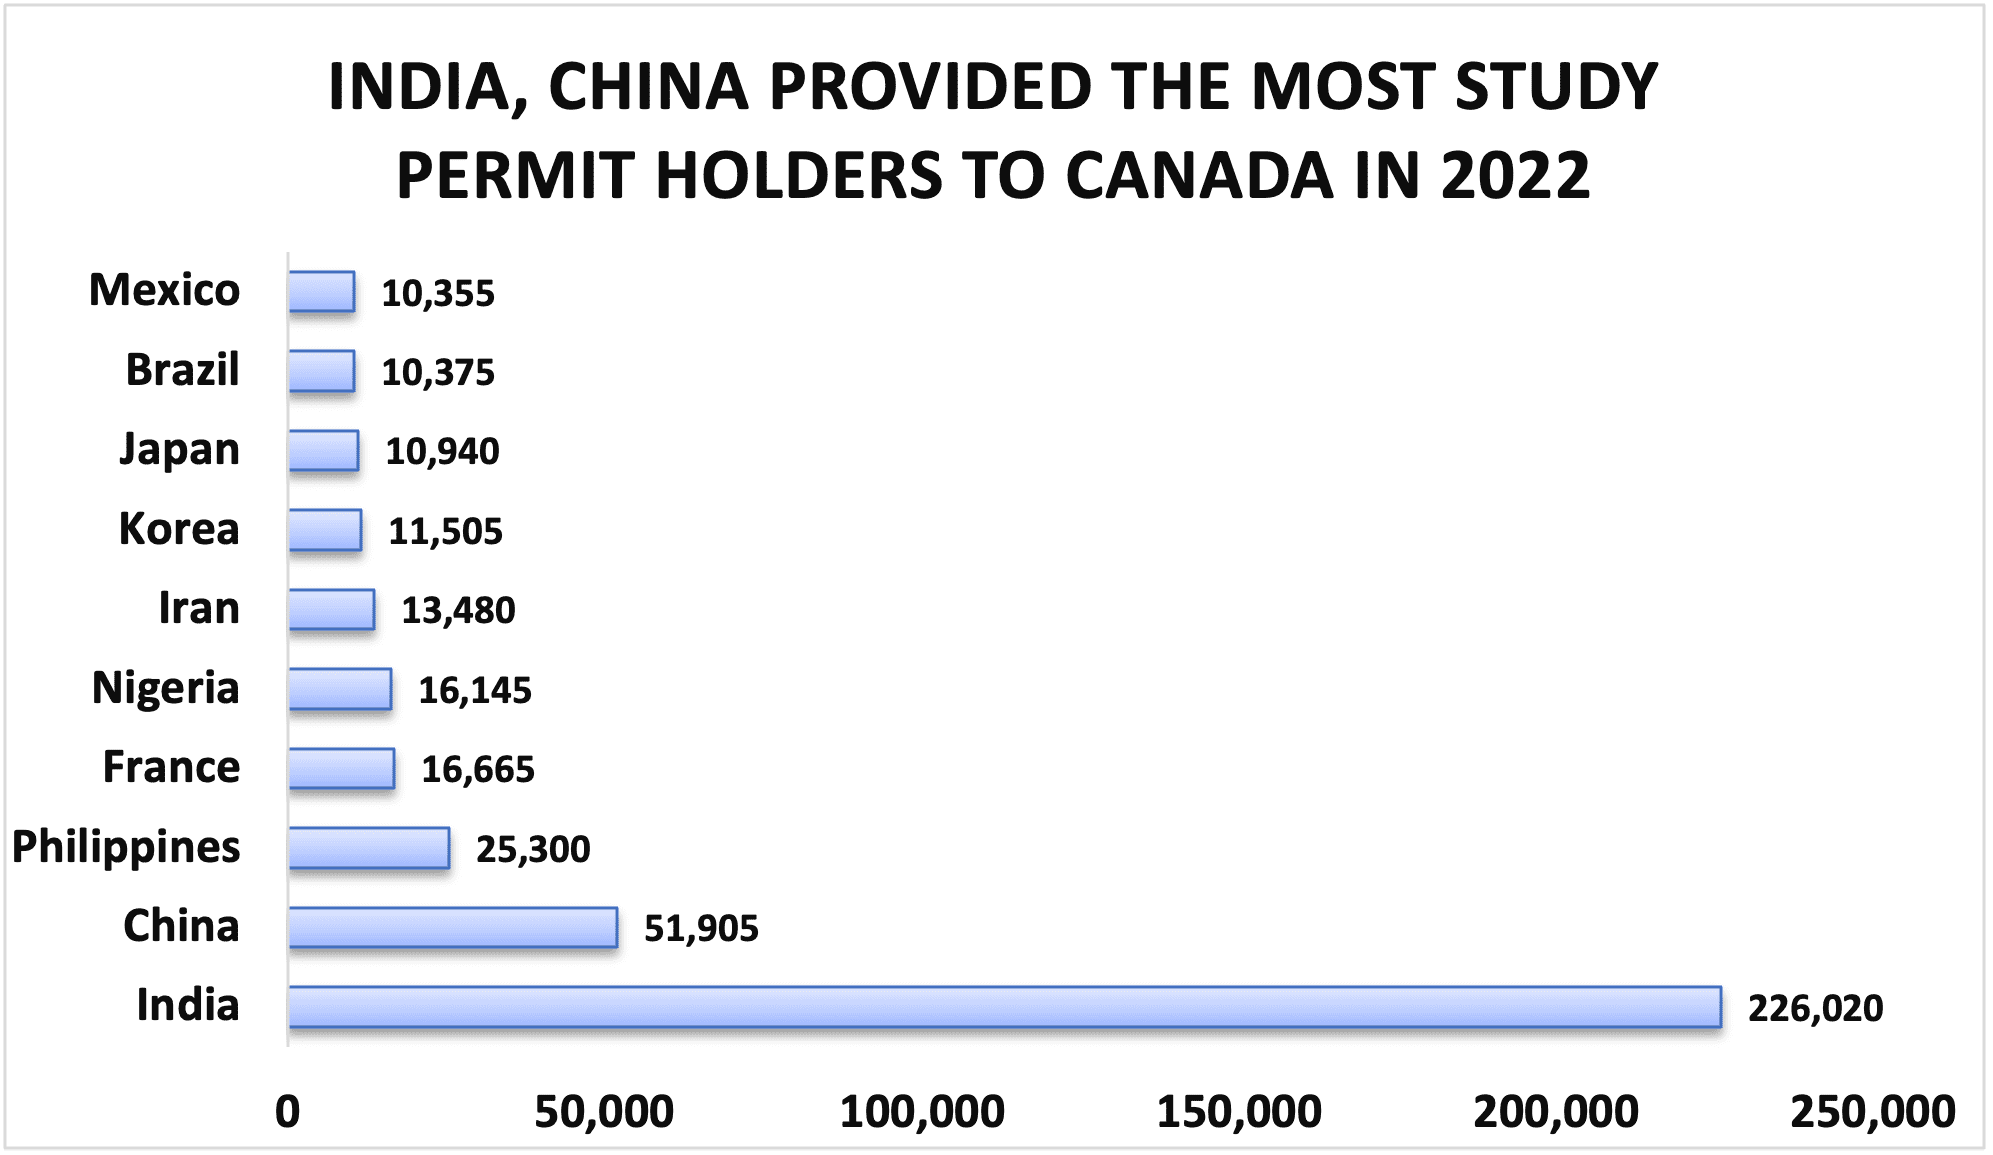 INDIA, CHINA PROVIDED THE MOST STUDY PERMIT HOLDERS TO CANADA IN 2022